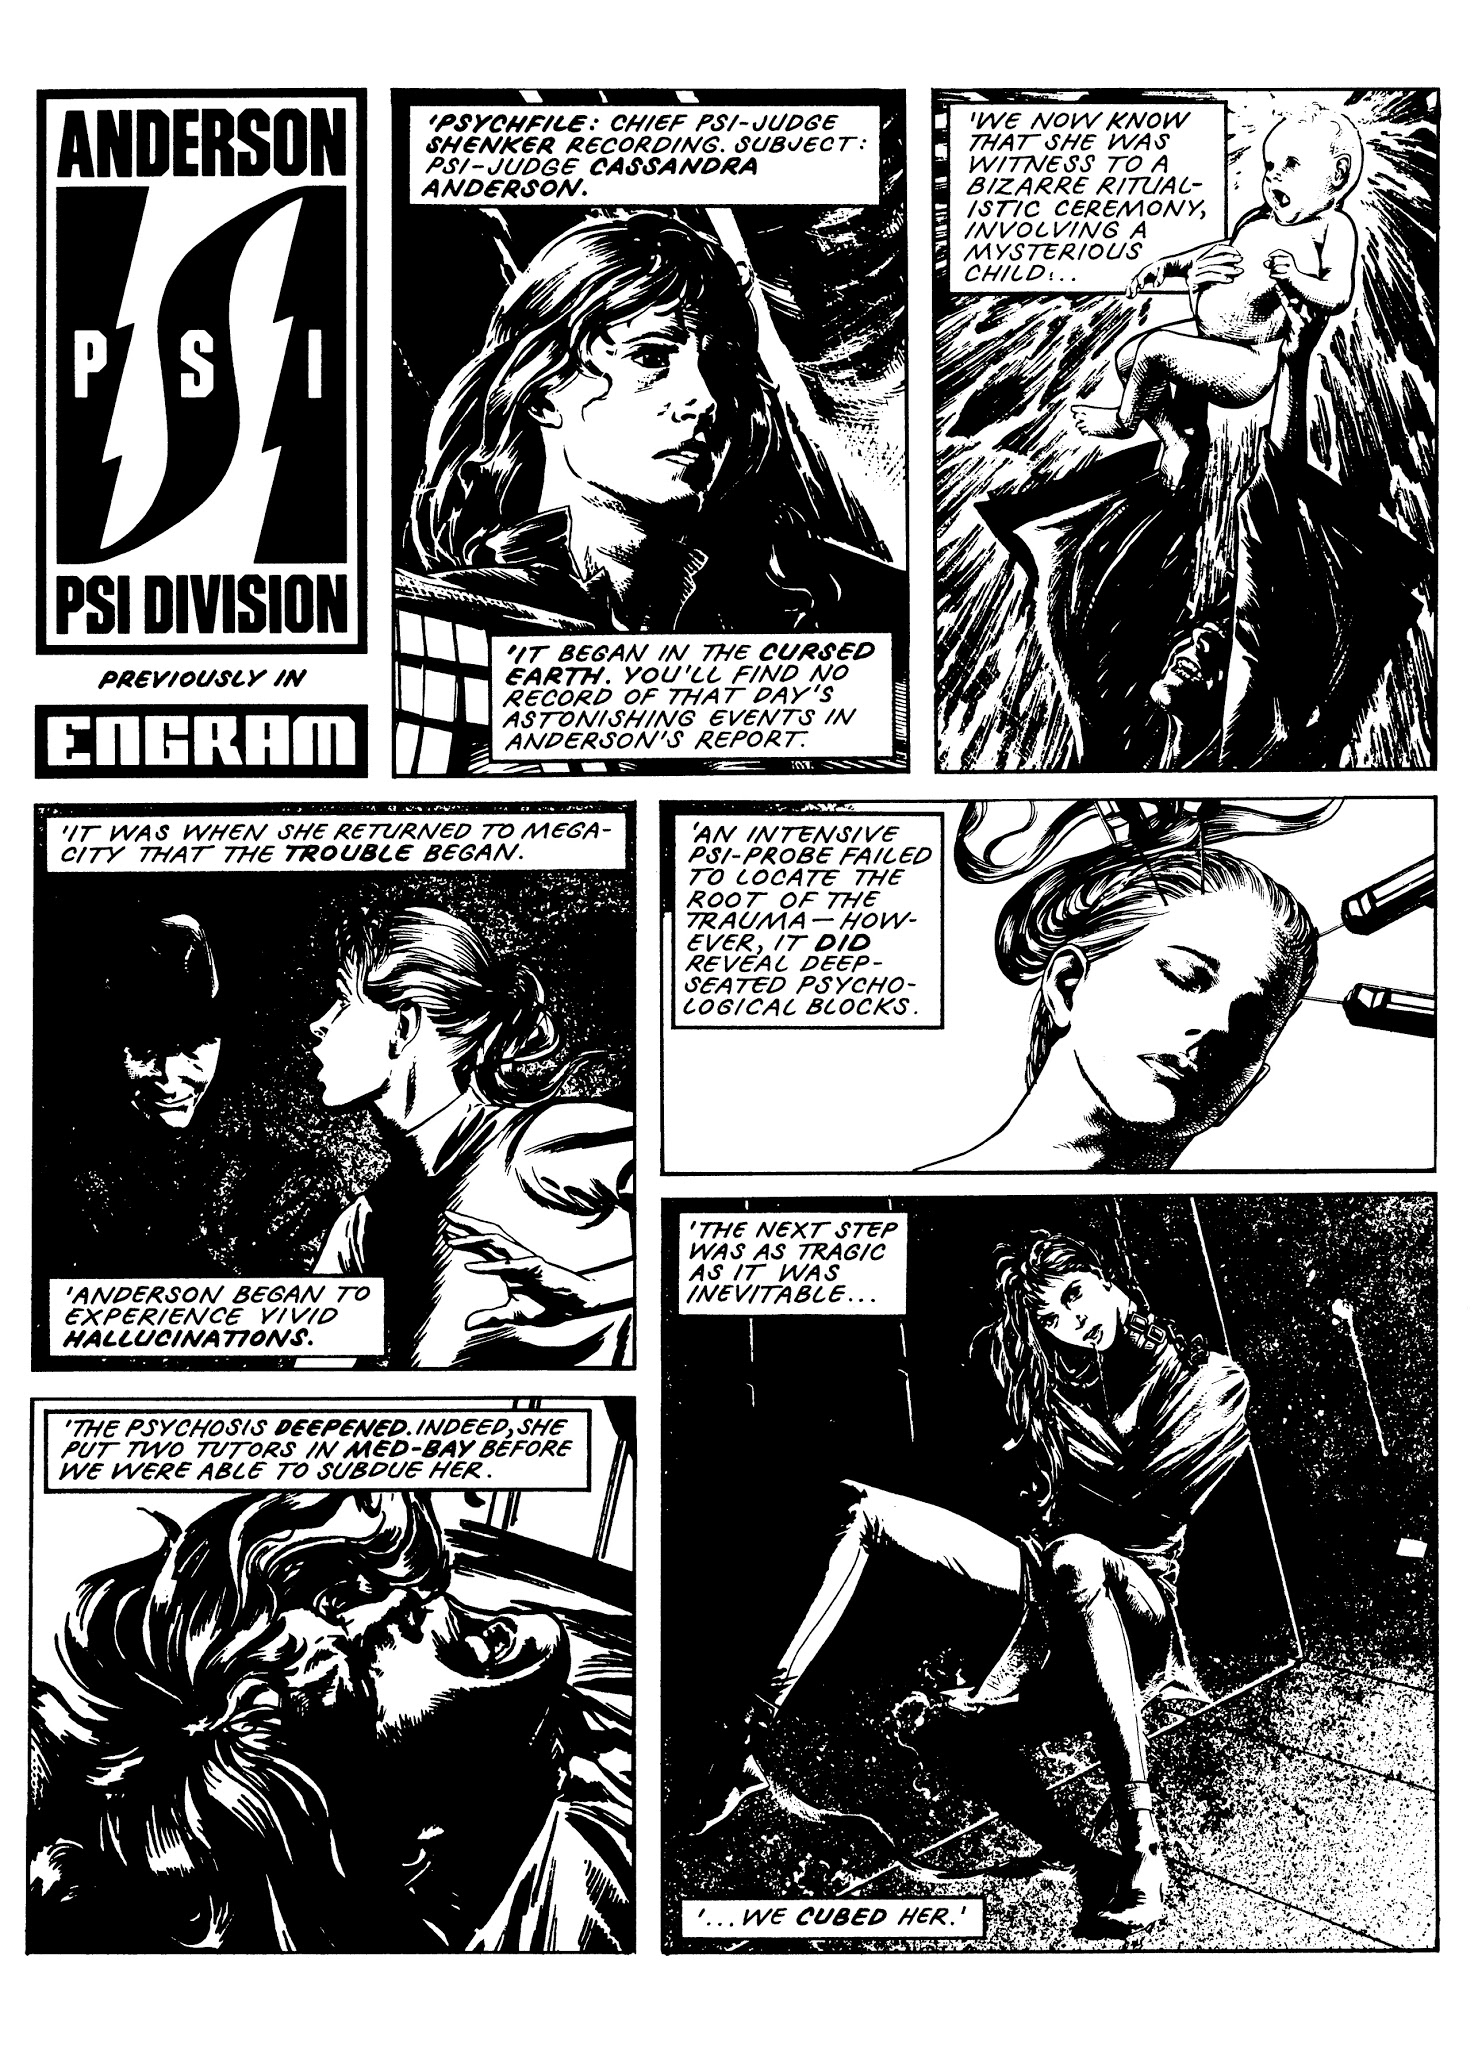 Read online Judge Anderson: The Psi Files comic -  Issue # TPB 1 - 393